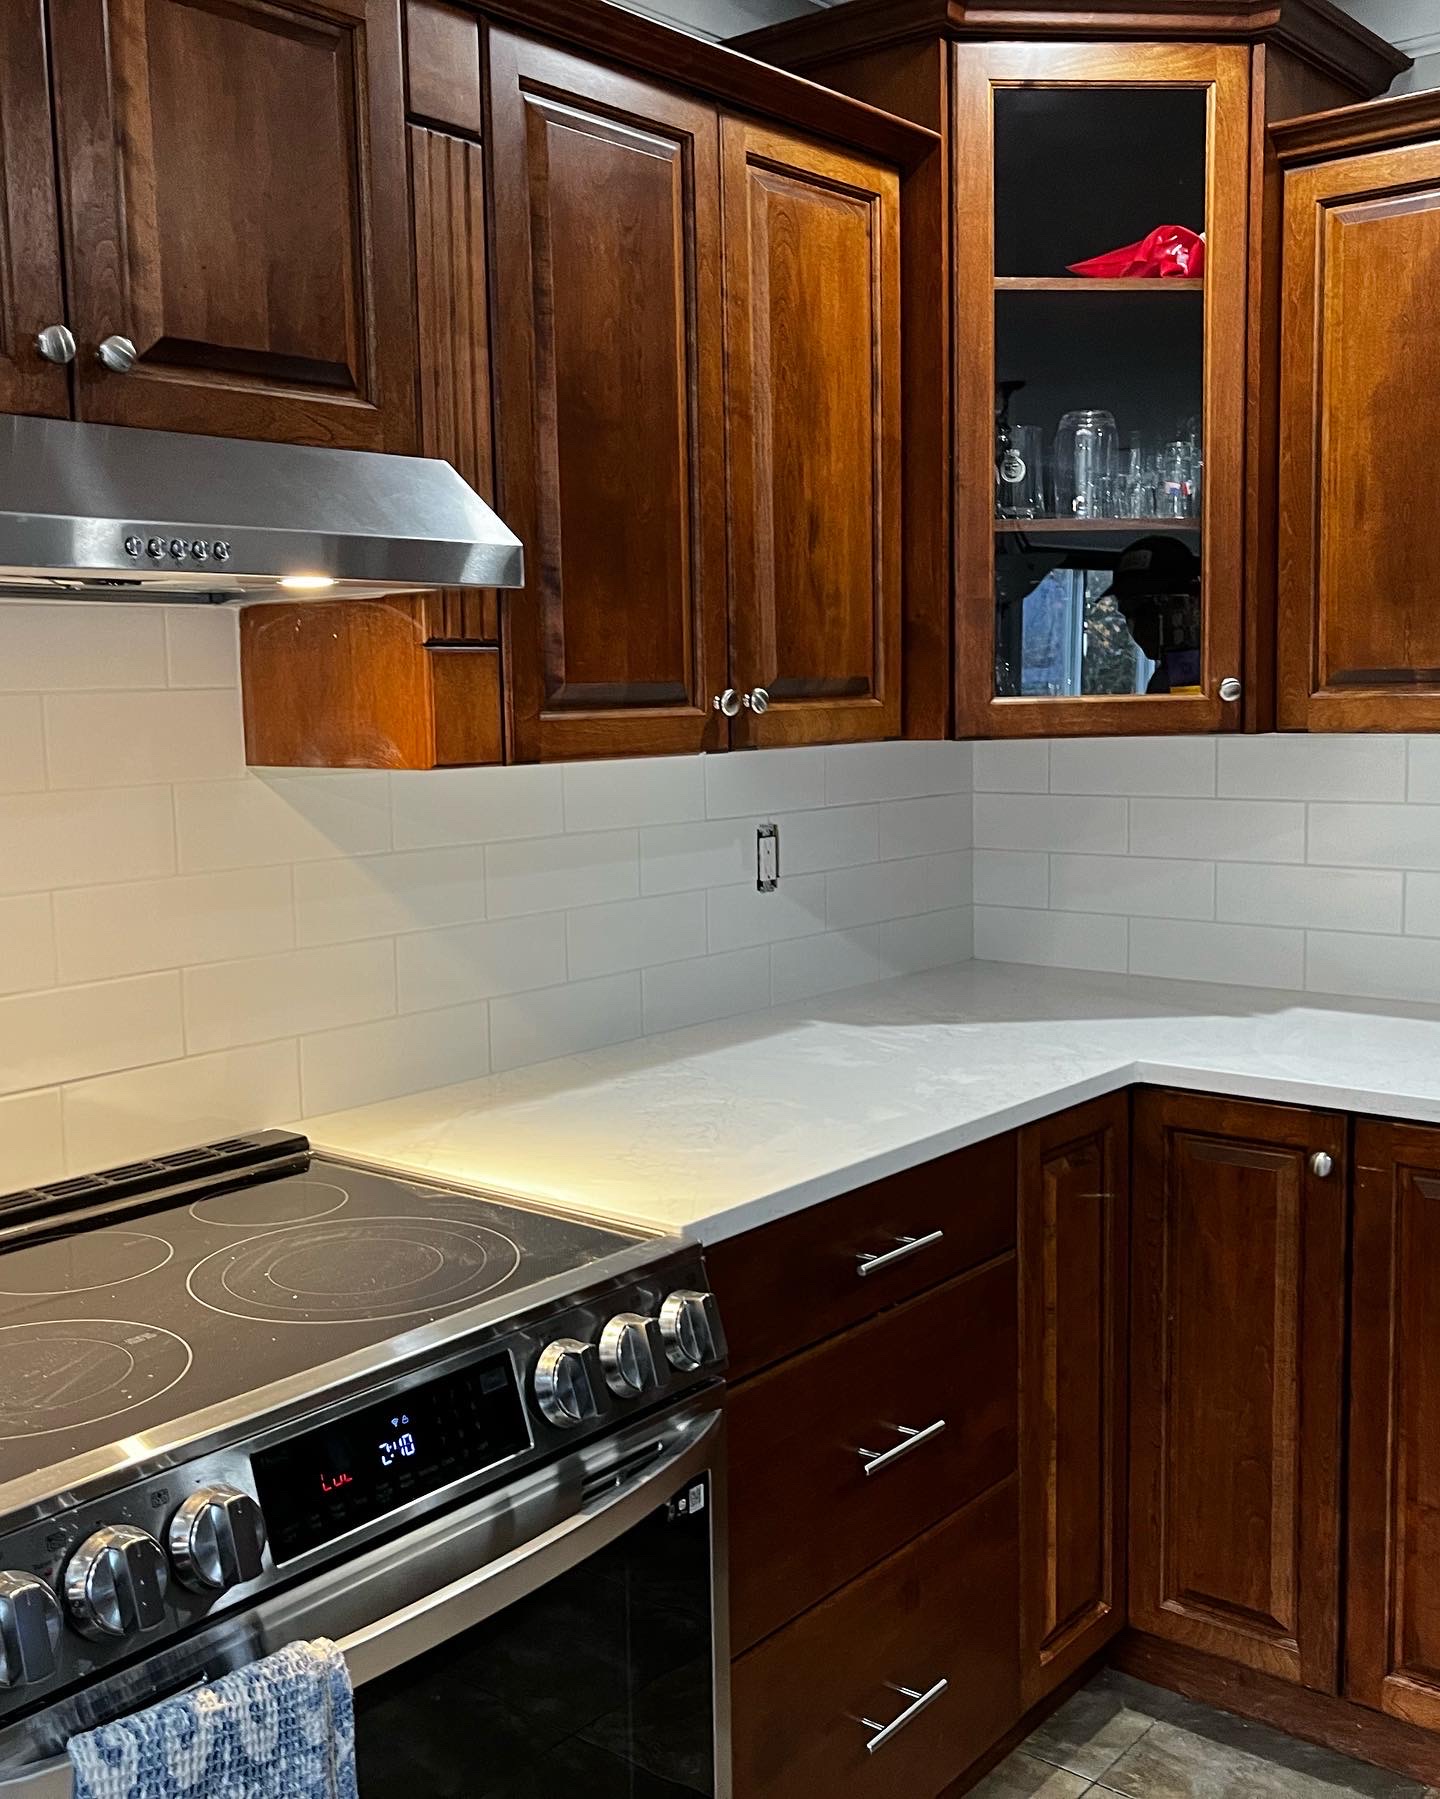 White Quartz counters and white subway tile backsplash complete a contrast with dark wood cabinets